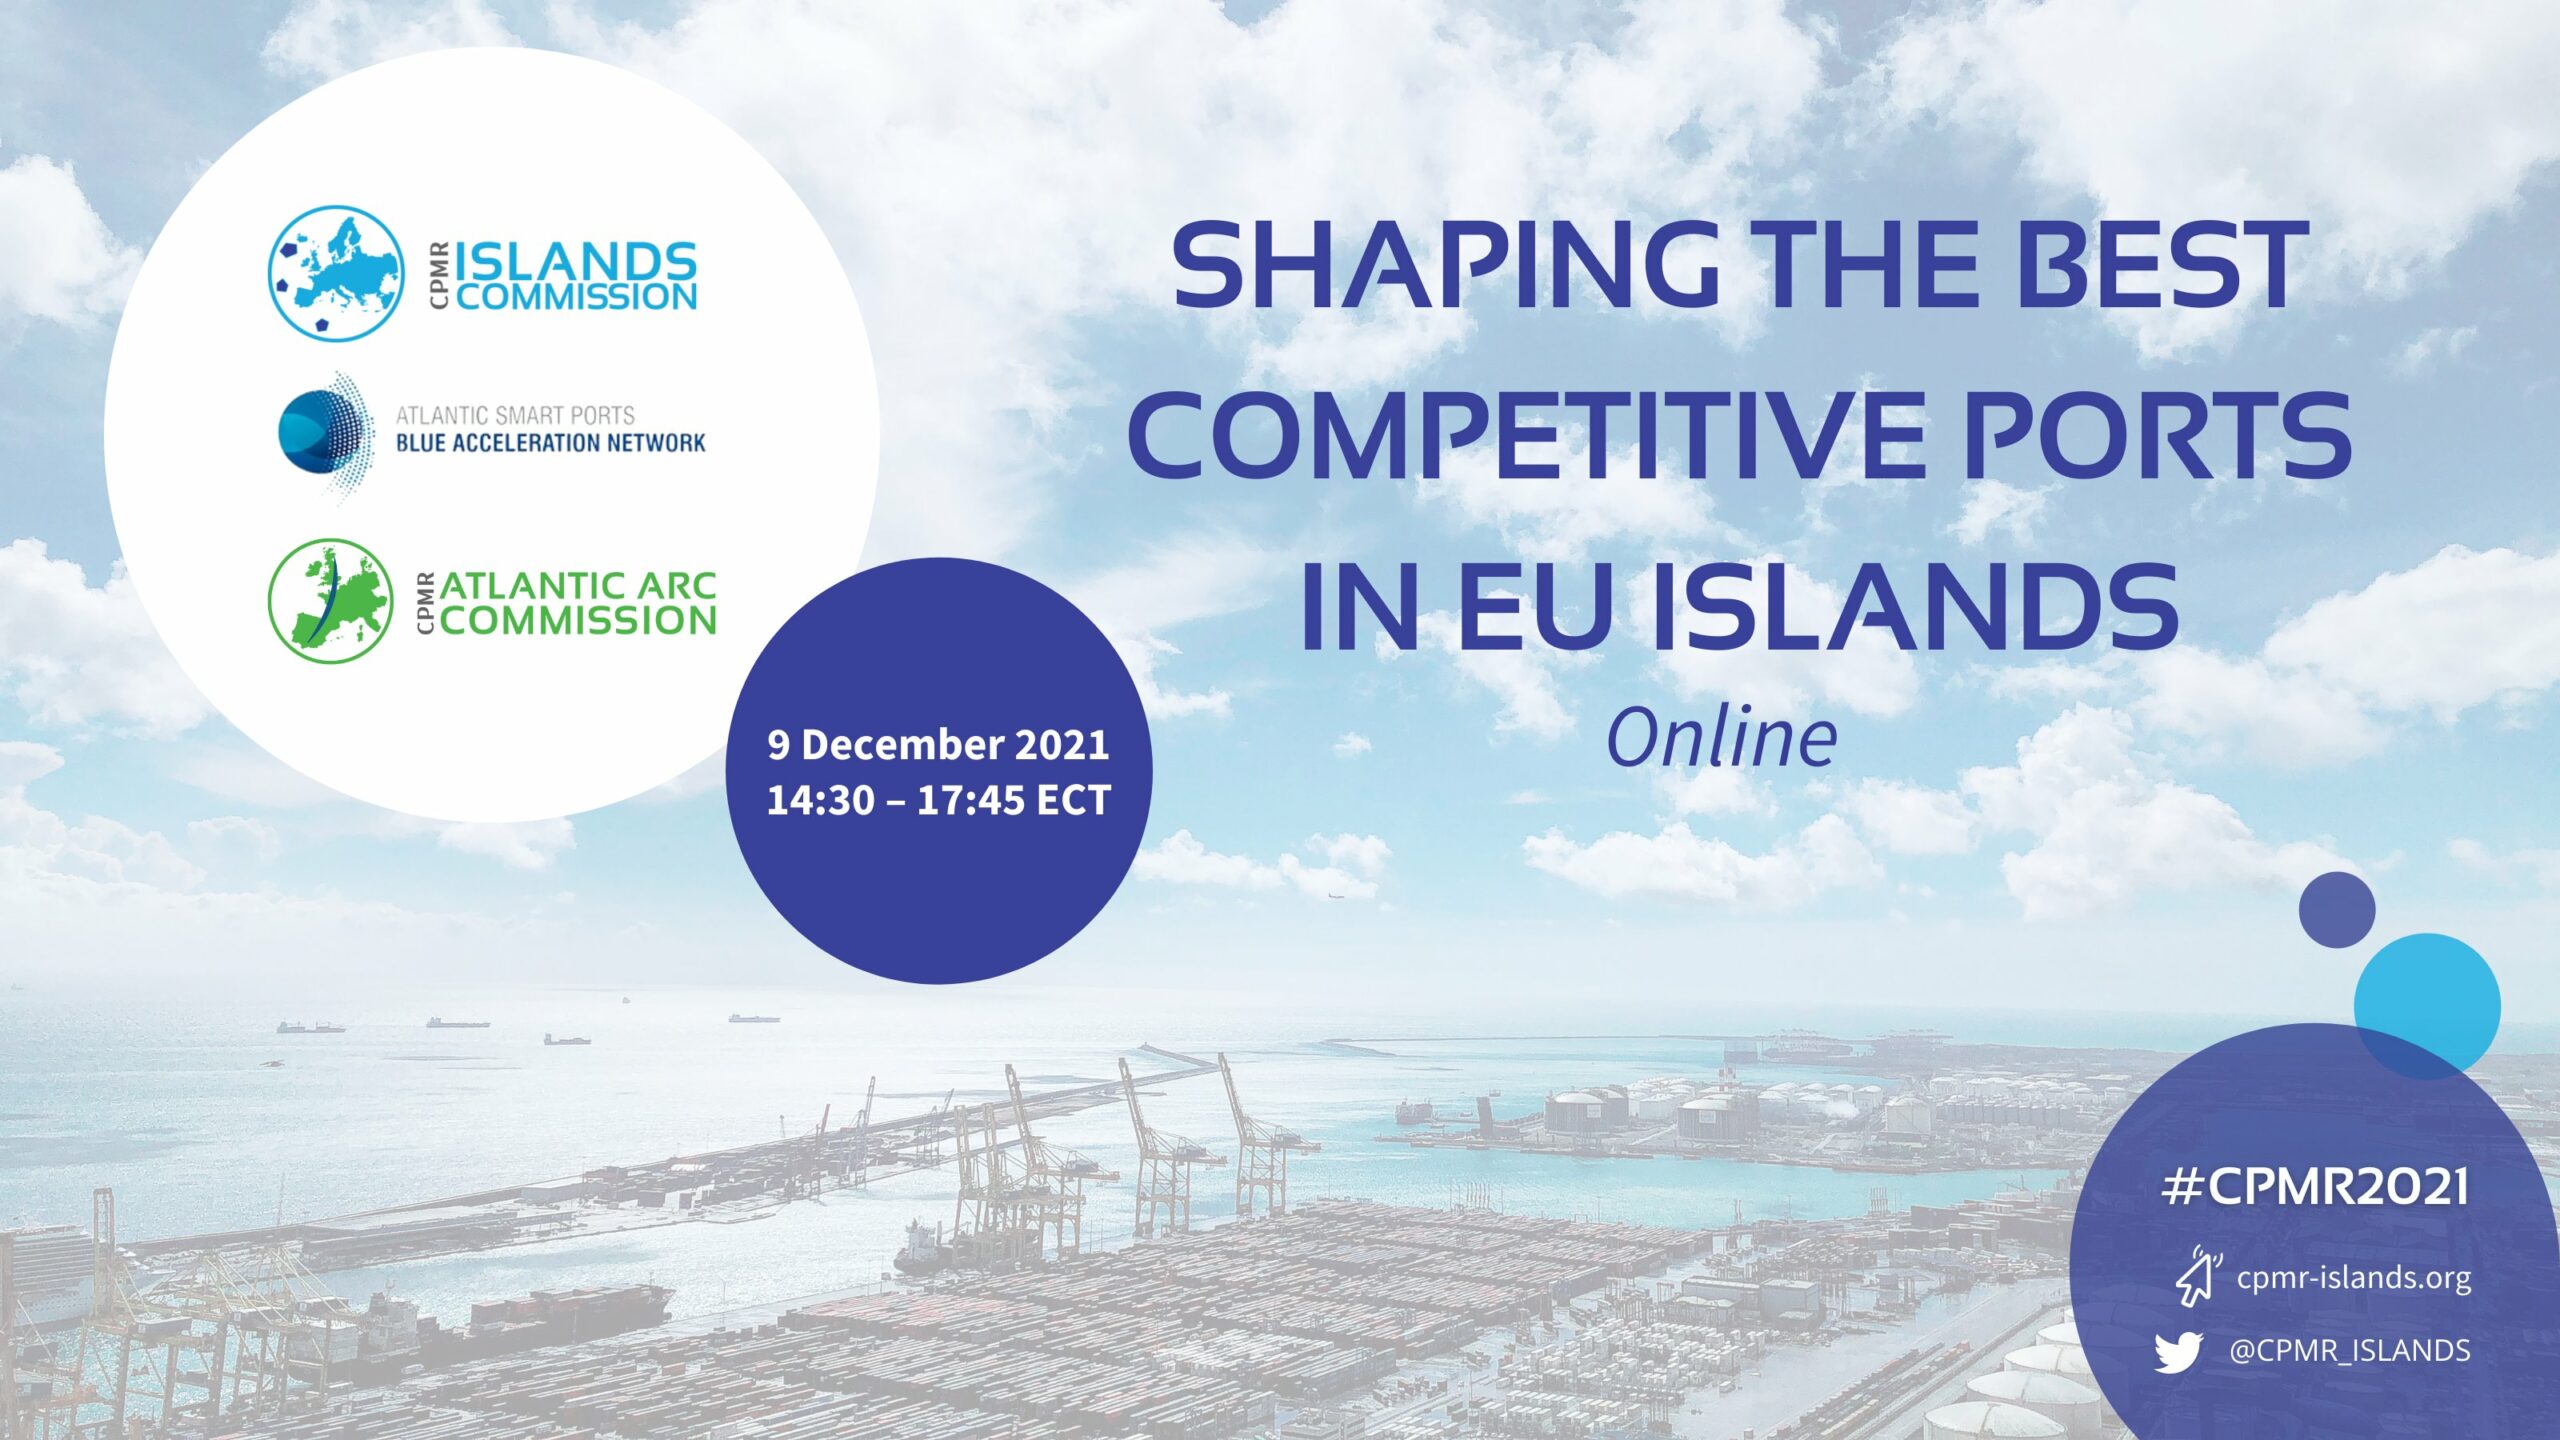 Shaping the Best Competitive Ports in EU Islands